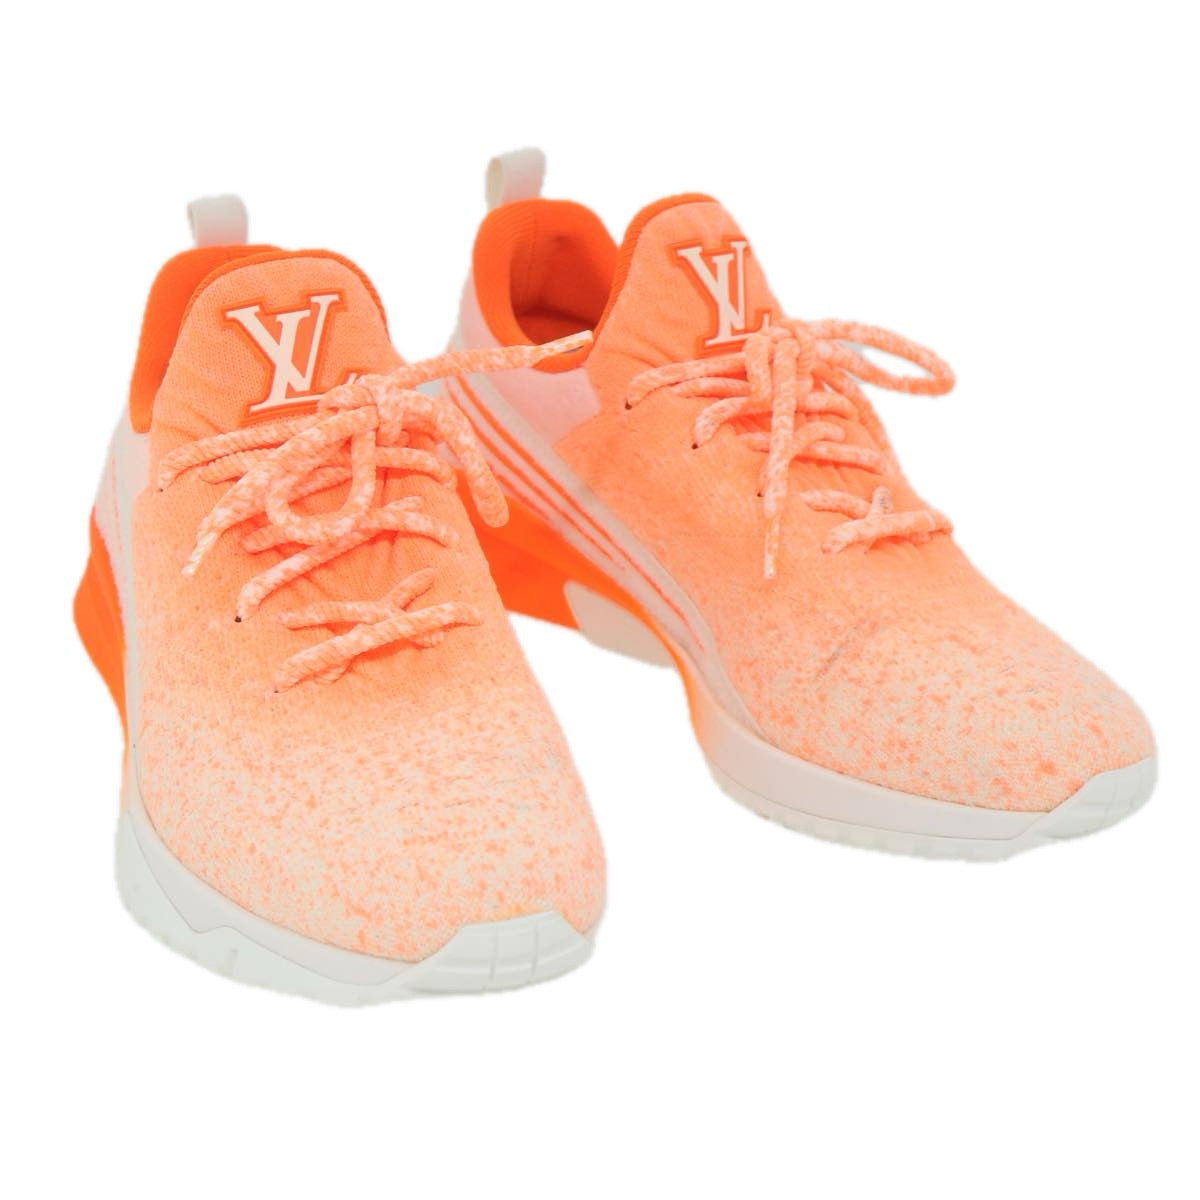 LOUIS VUITTON V.N.R Sneakers Knitted Fabrics 5 Orange LV Auth 58977A